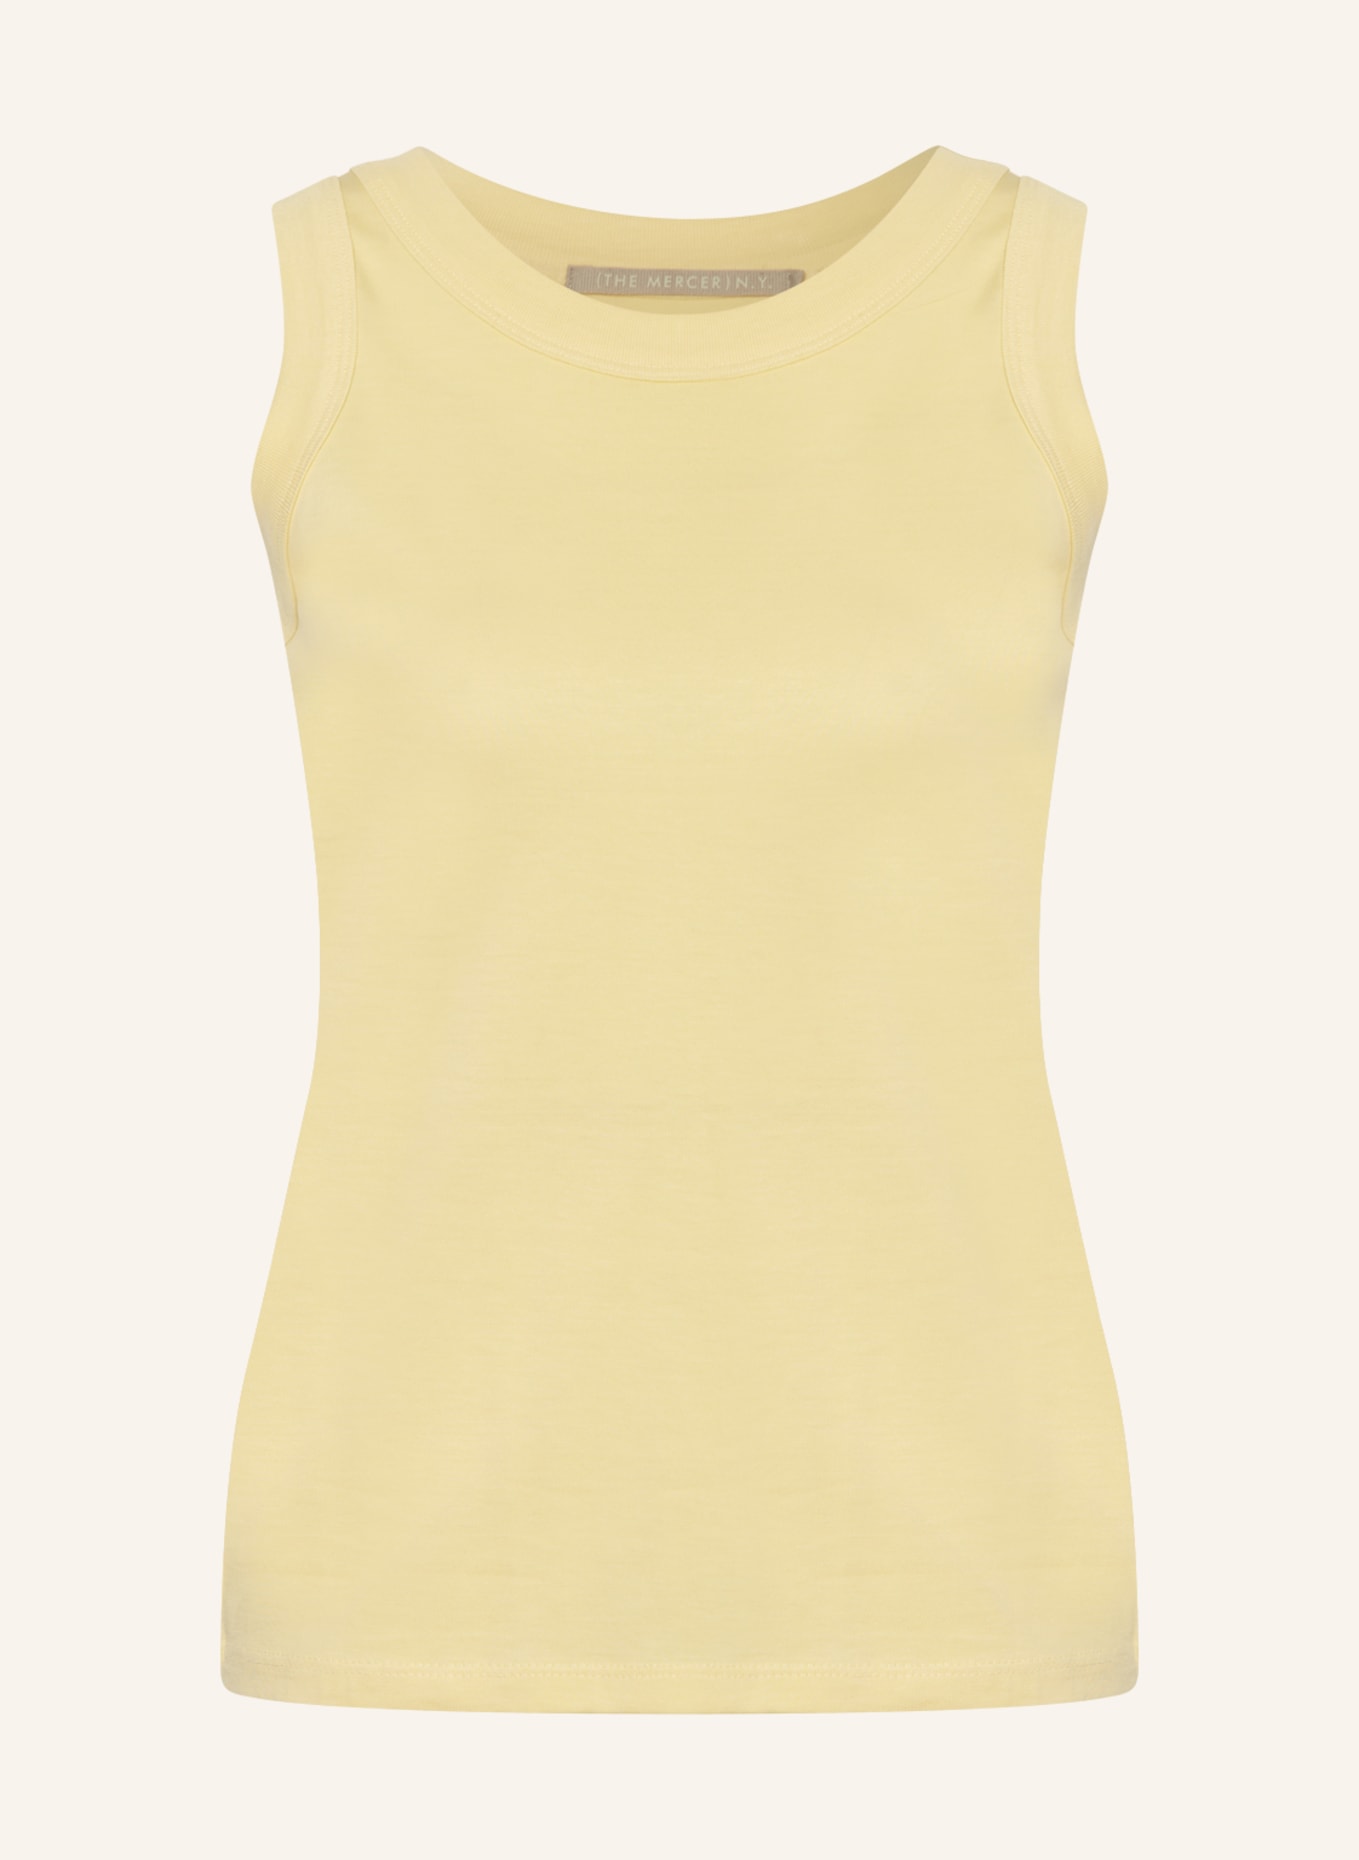 (THE MERCER) N.Y. Top, Color: YELLOW (Image 1)